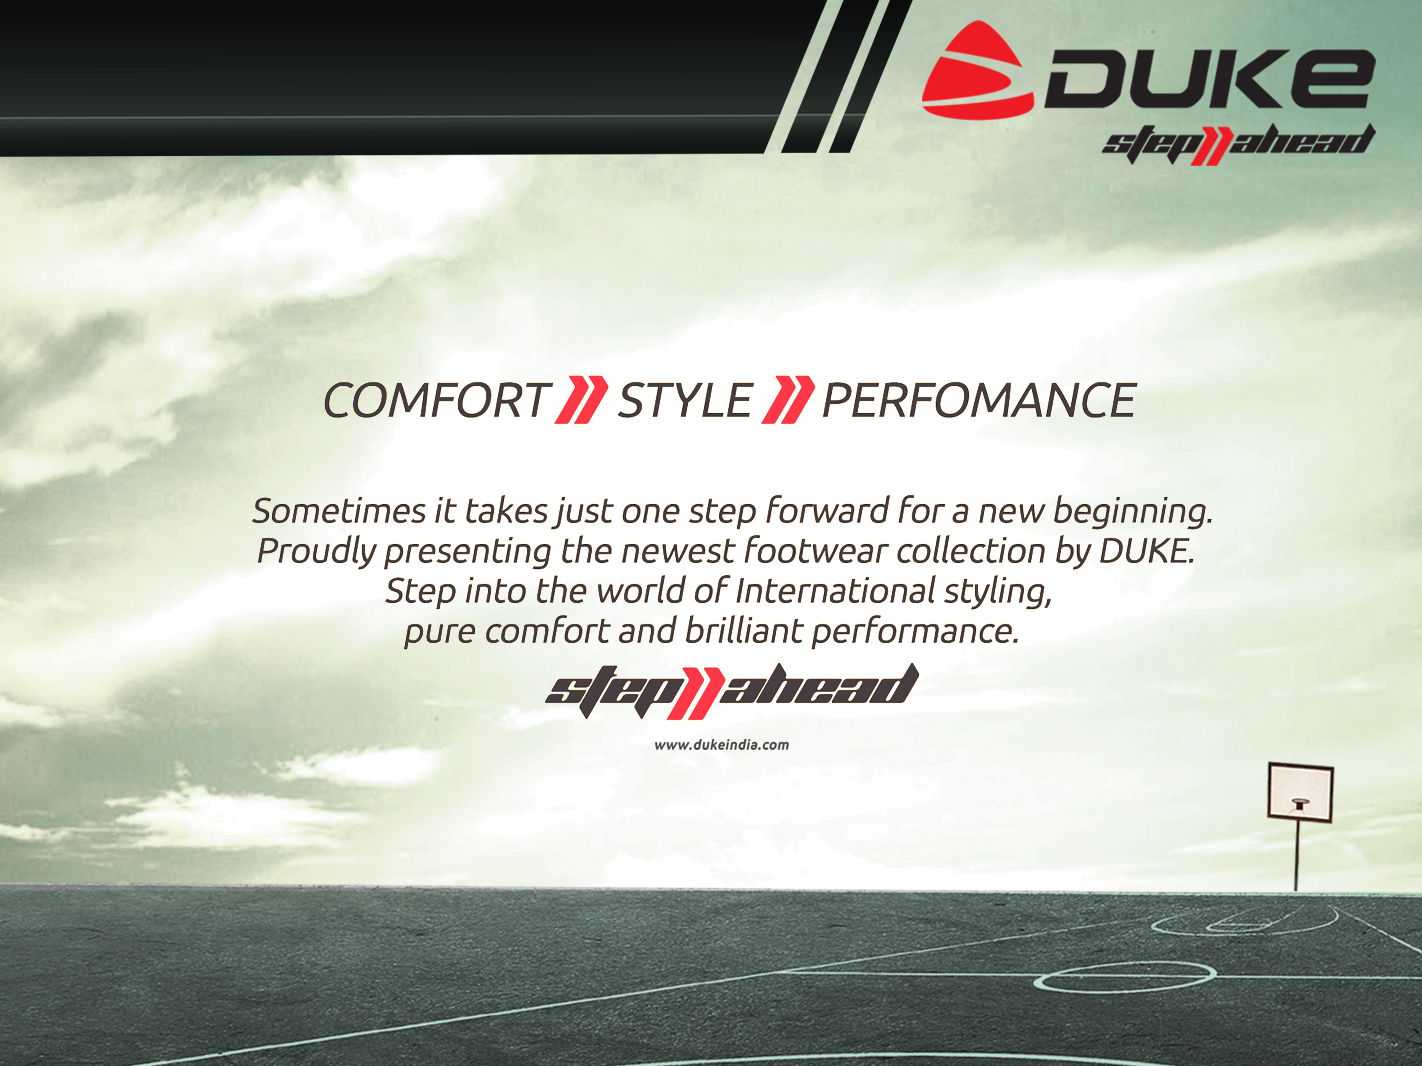 DUKE INTRODUCED STEP AHEAD FOOTWEAR COLLECTION